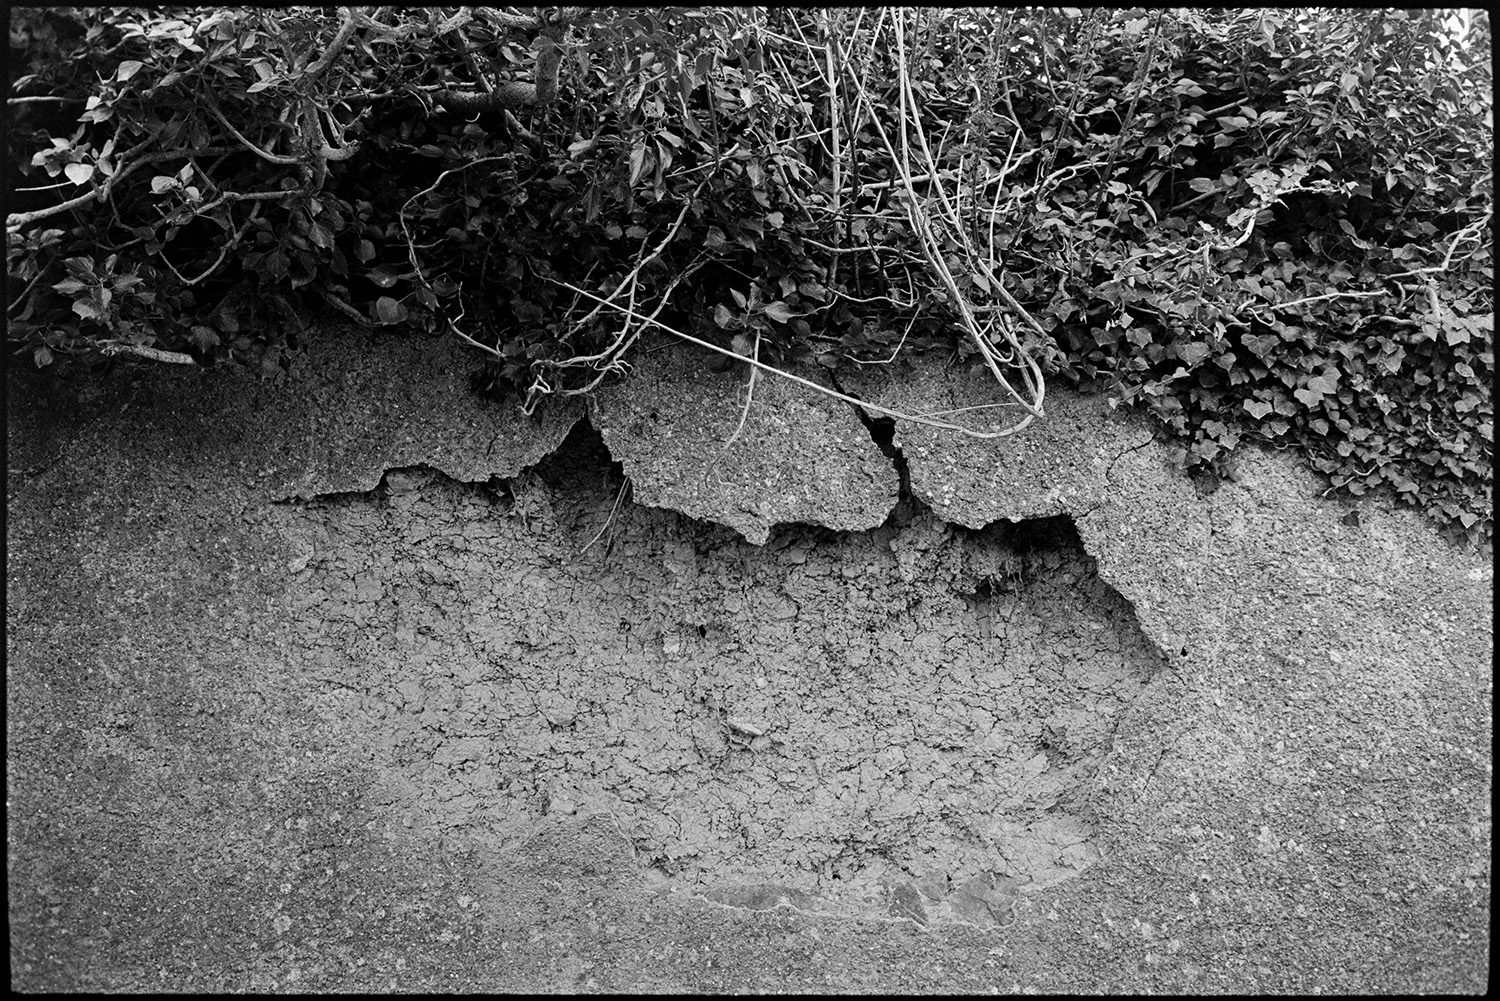 Cracking cob wall with ivy.
[A close up view of a crack in a cob wall topped with ivy at Westacott, Riddlecombe.]